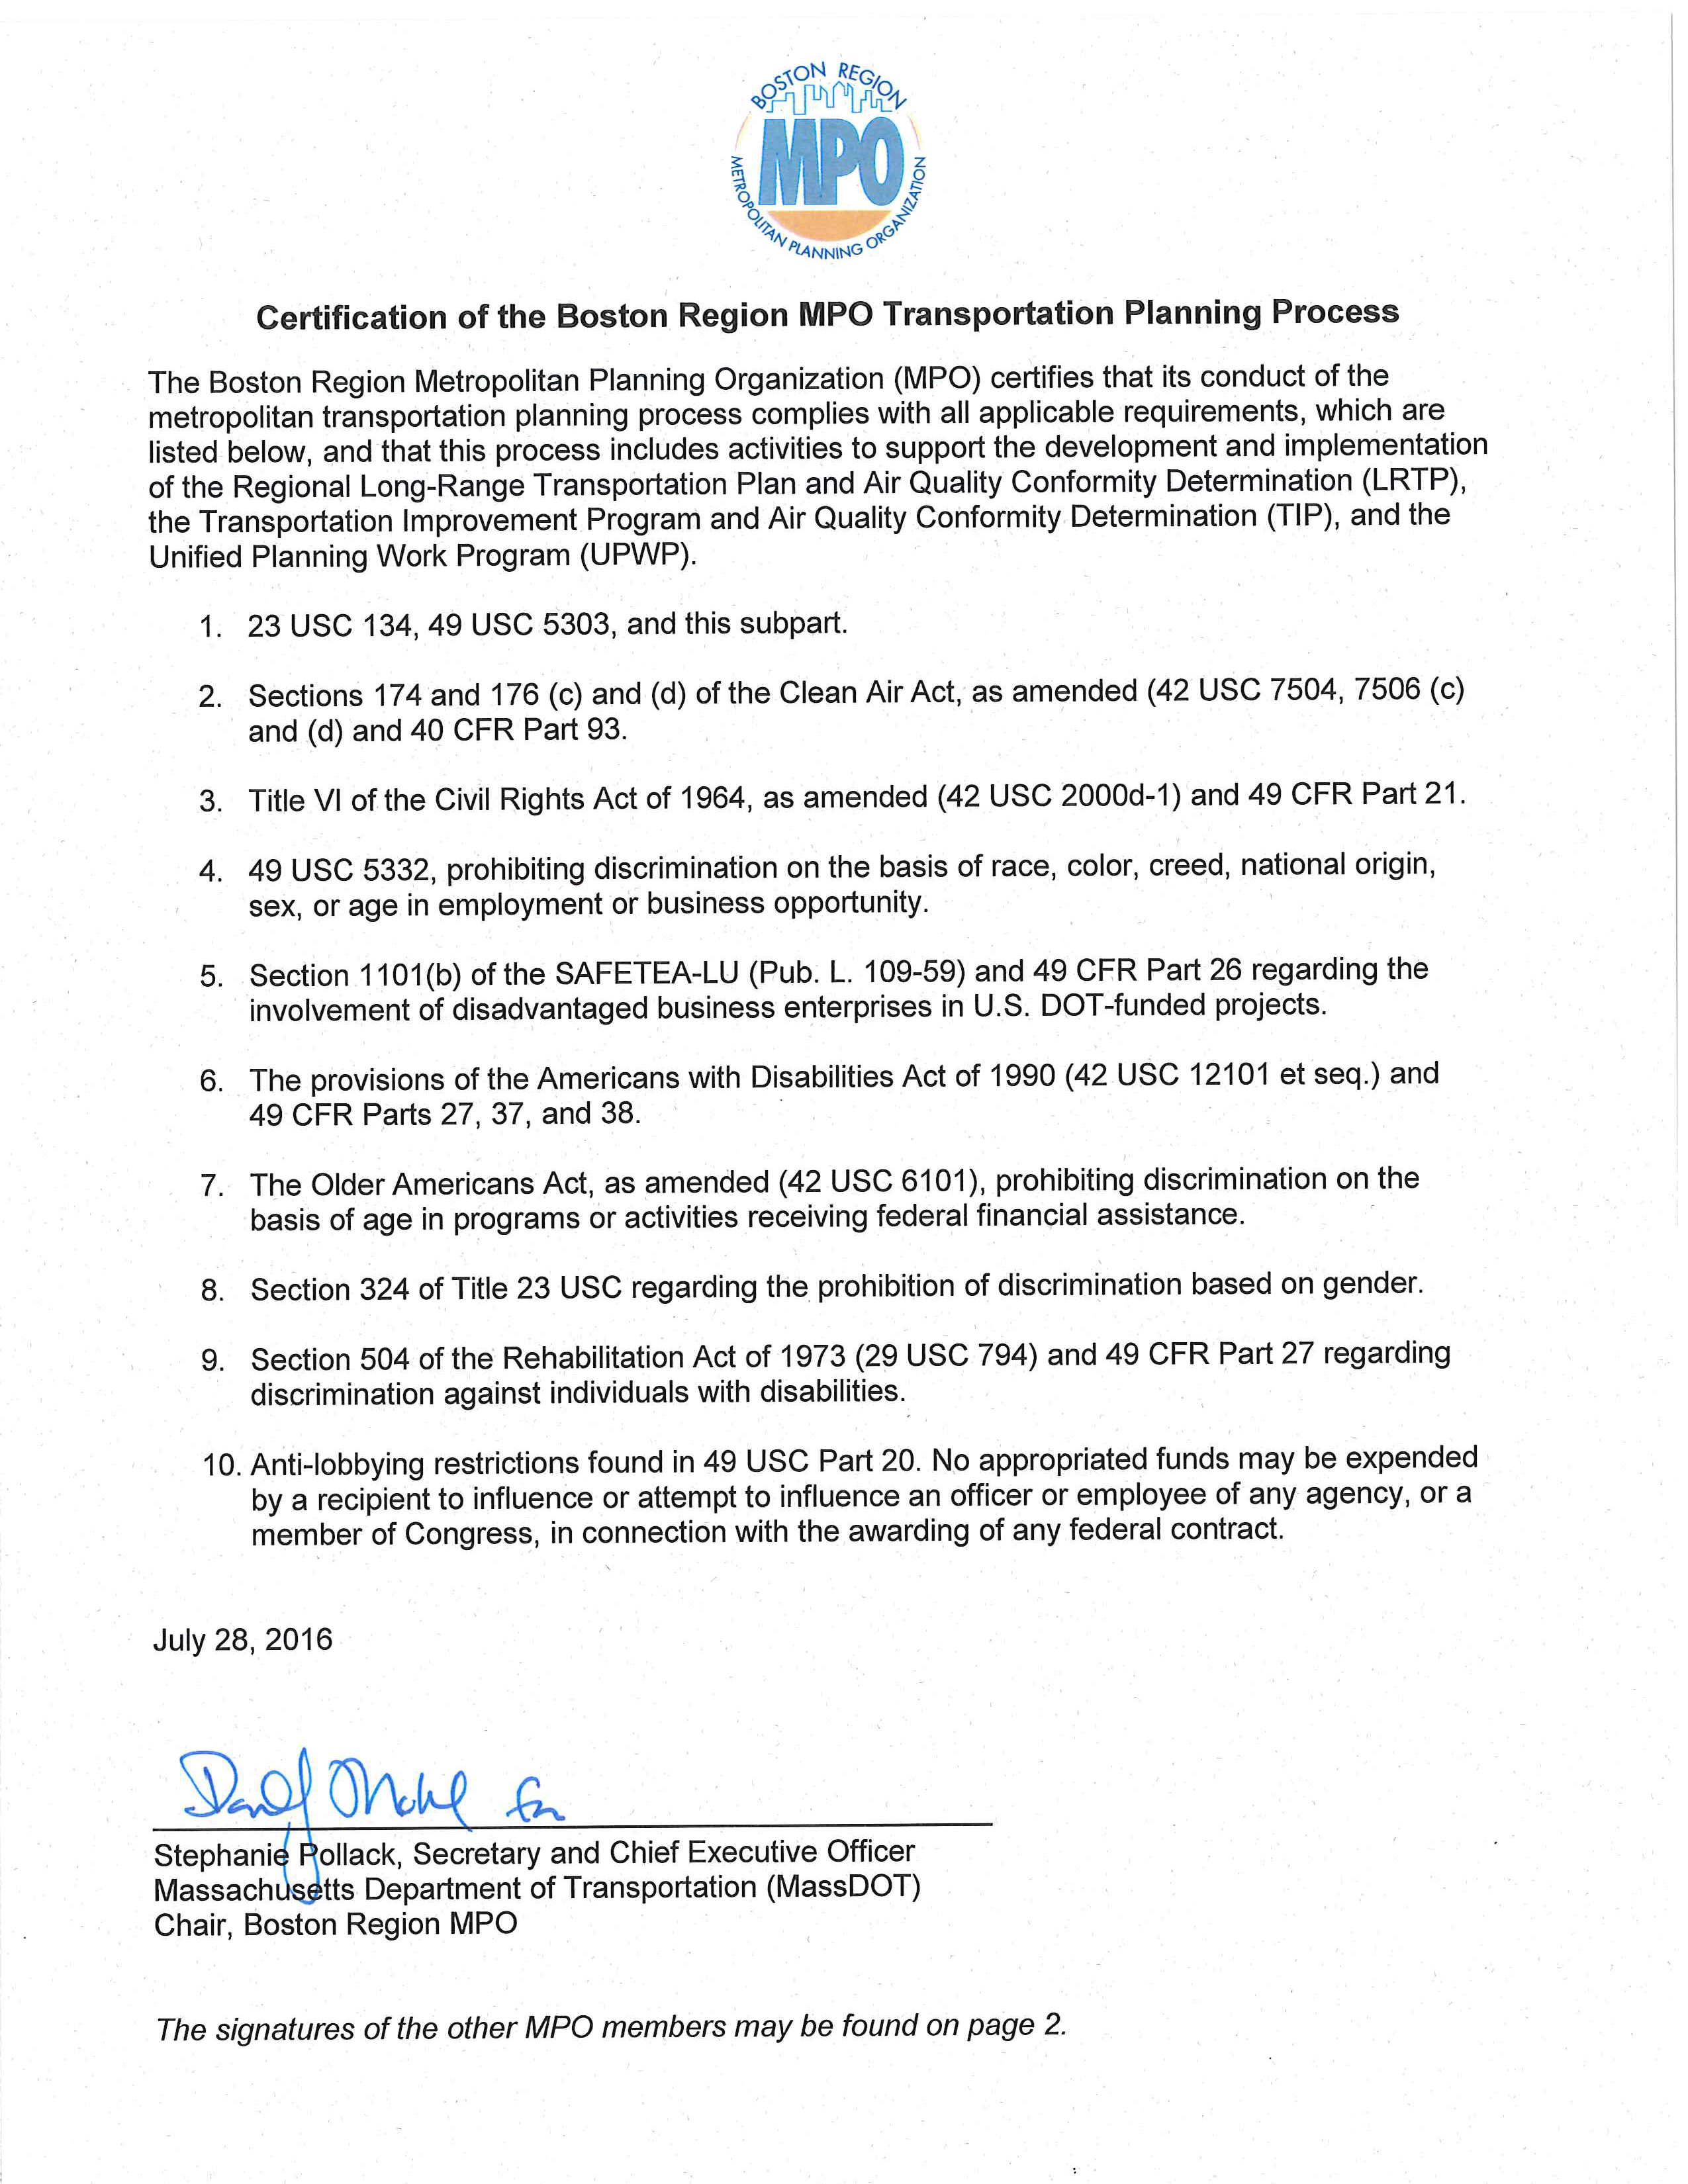 Page 1 of 2. These pages are the self-certification statement of the Boston Region MPO. The MPO certifies that its conduct of the metropolitan transportation planning process complies with all applicable requirements, and that this process includes activities to support the development and implementation of the Regional Long-Range Transportation Plan and Air Quality Conformity Determination (LRTP), the Transportation Improvement Program and Air Quality Conformity Determination (TIP), and the Unified Planning Work Program (UPWP). These pages were signed on July 28, 2016 by the members of the MPO or their representatives.